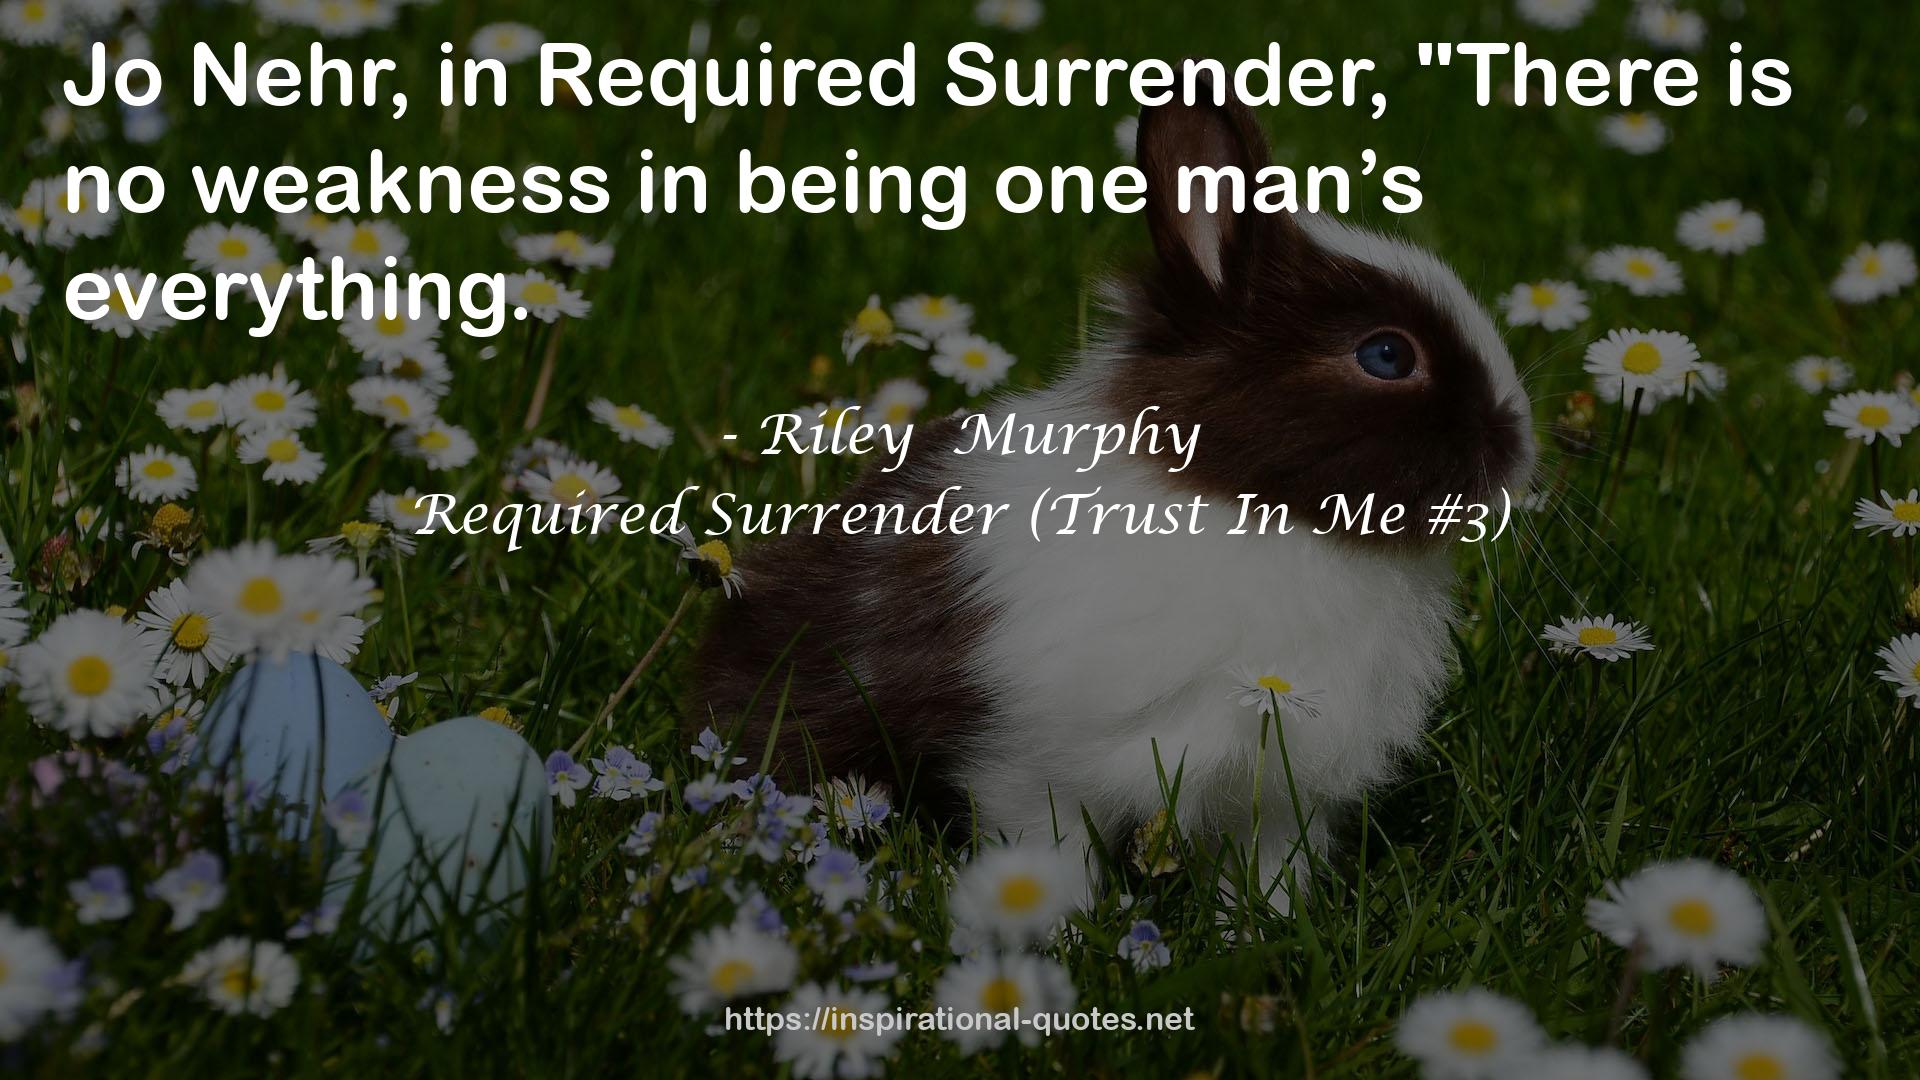 Required Surrender (Trust In Me #3) QUOTES